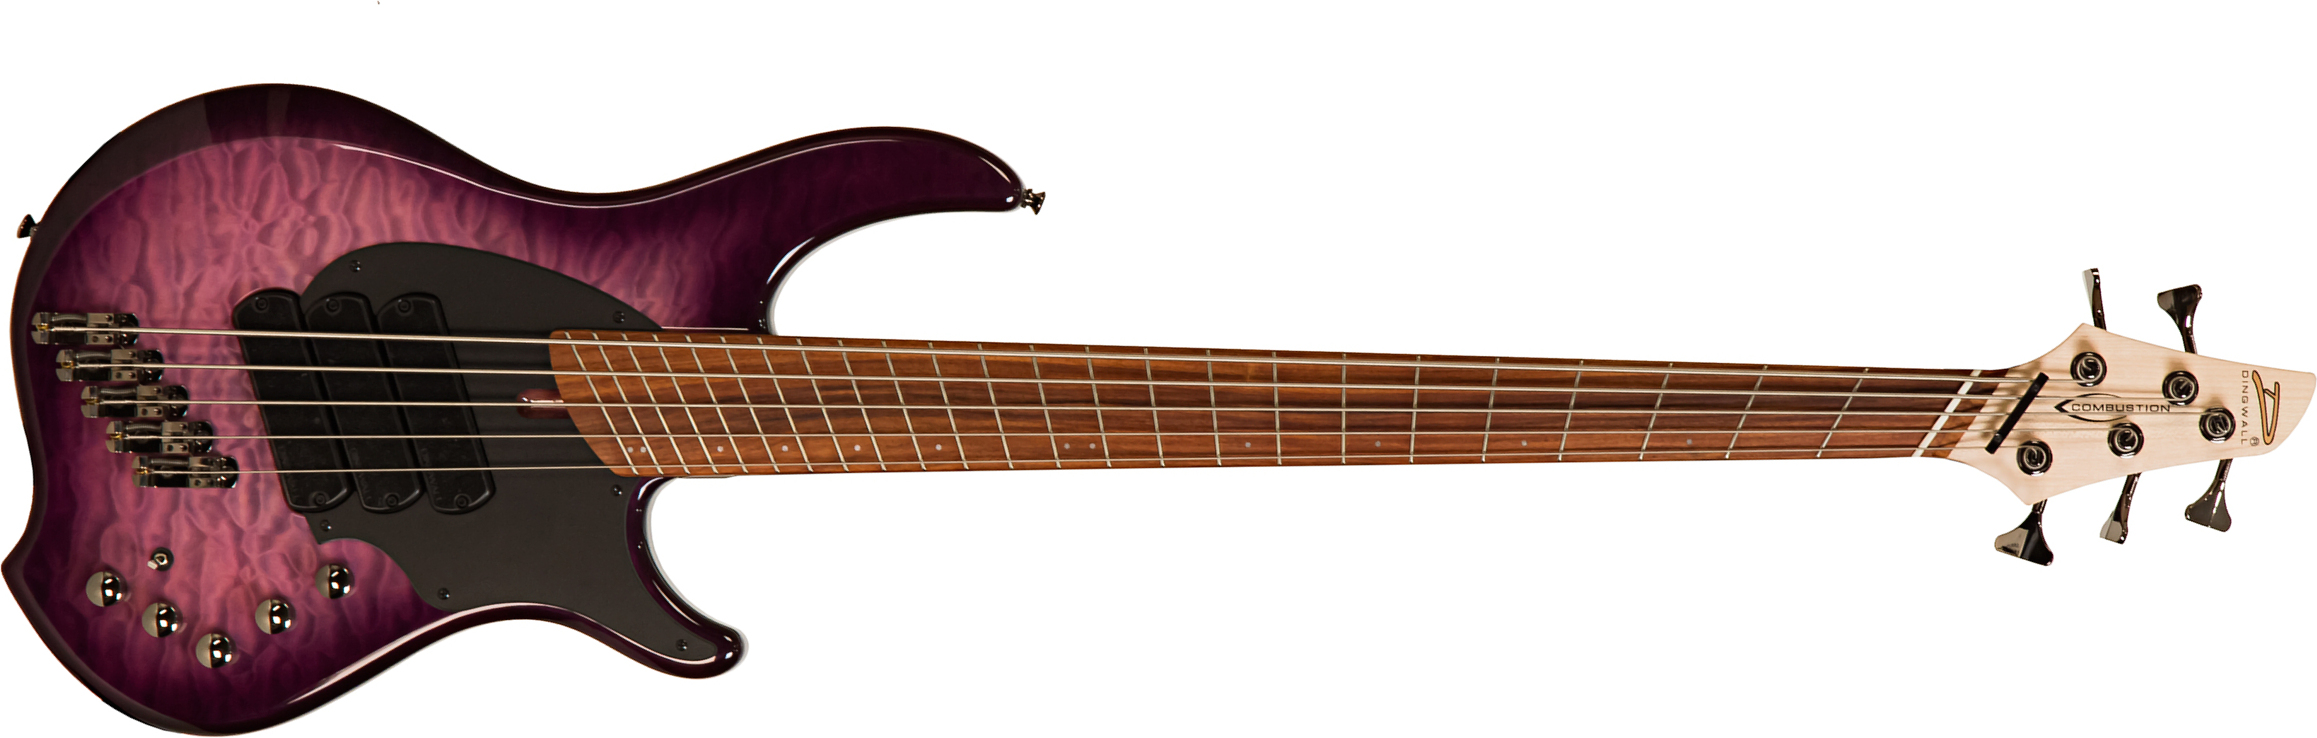 Dingwall Combustion Cb3 5c 3pu Active Mn - Ultra Violet Gloss - Solidbody E-bass - Main picture